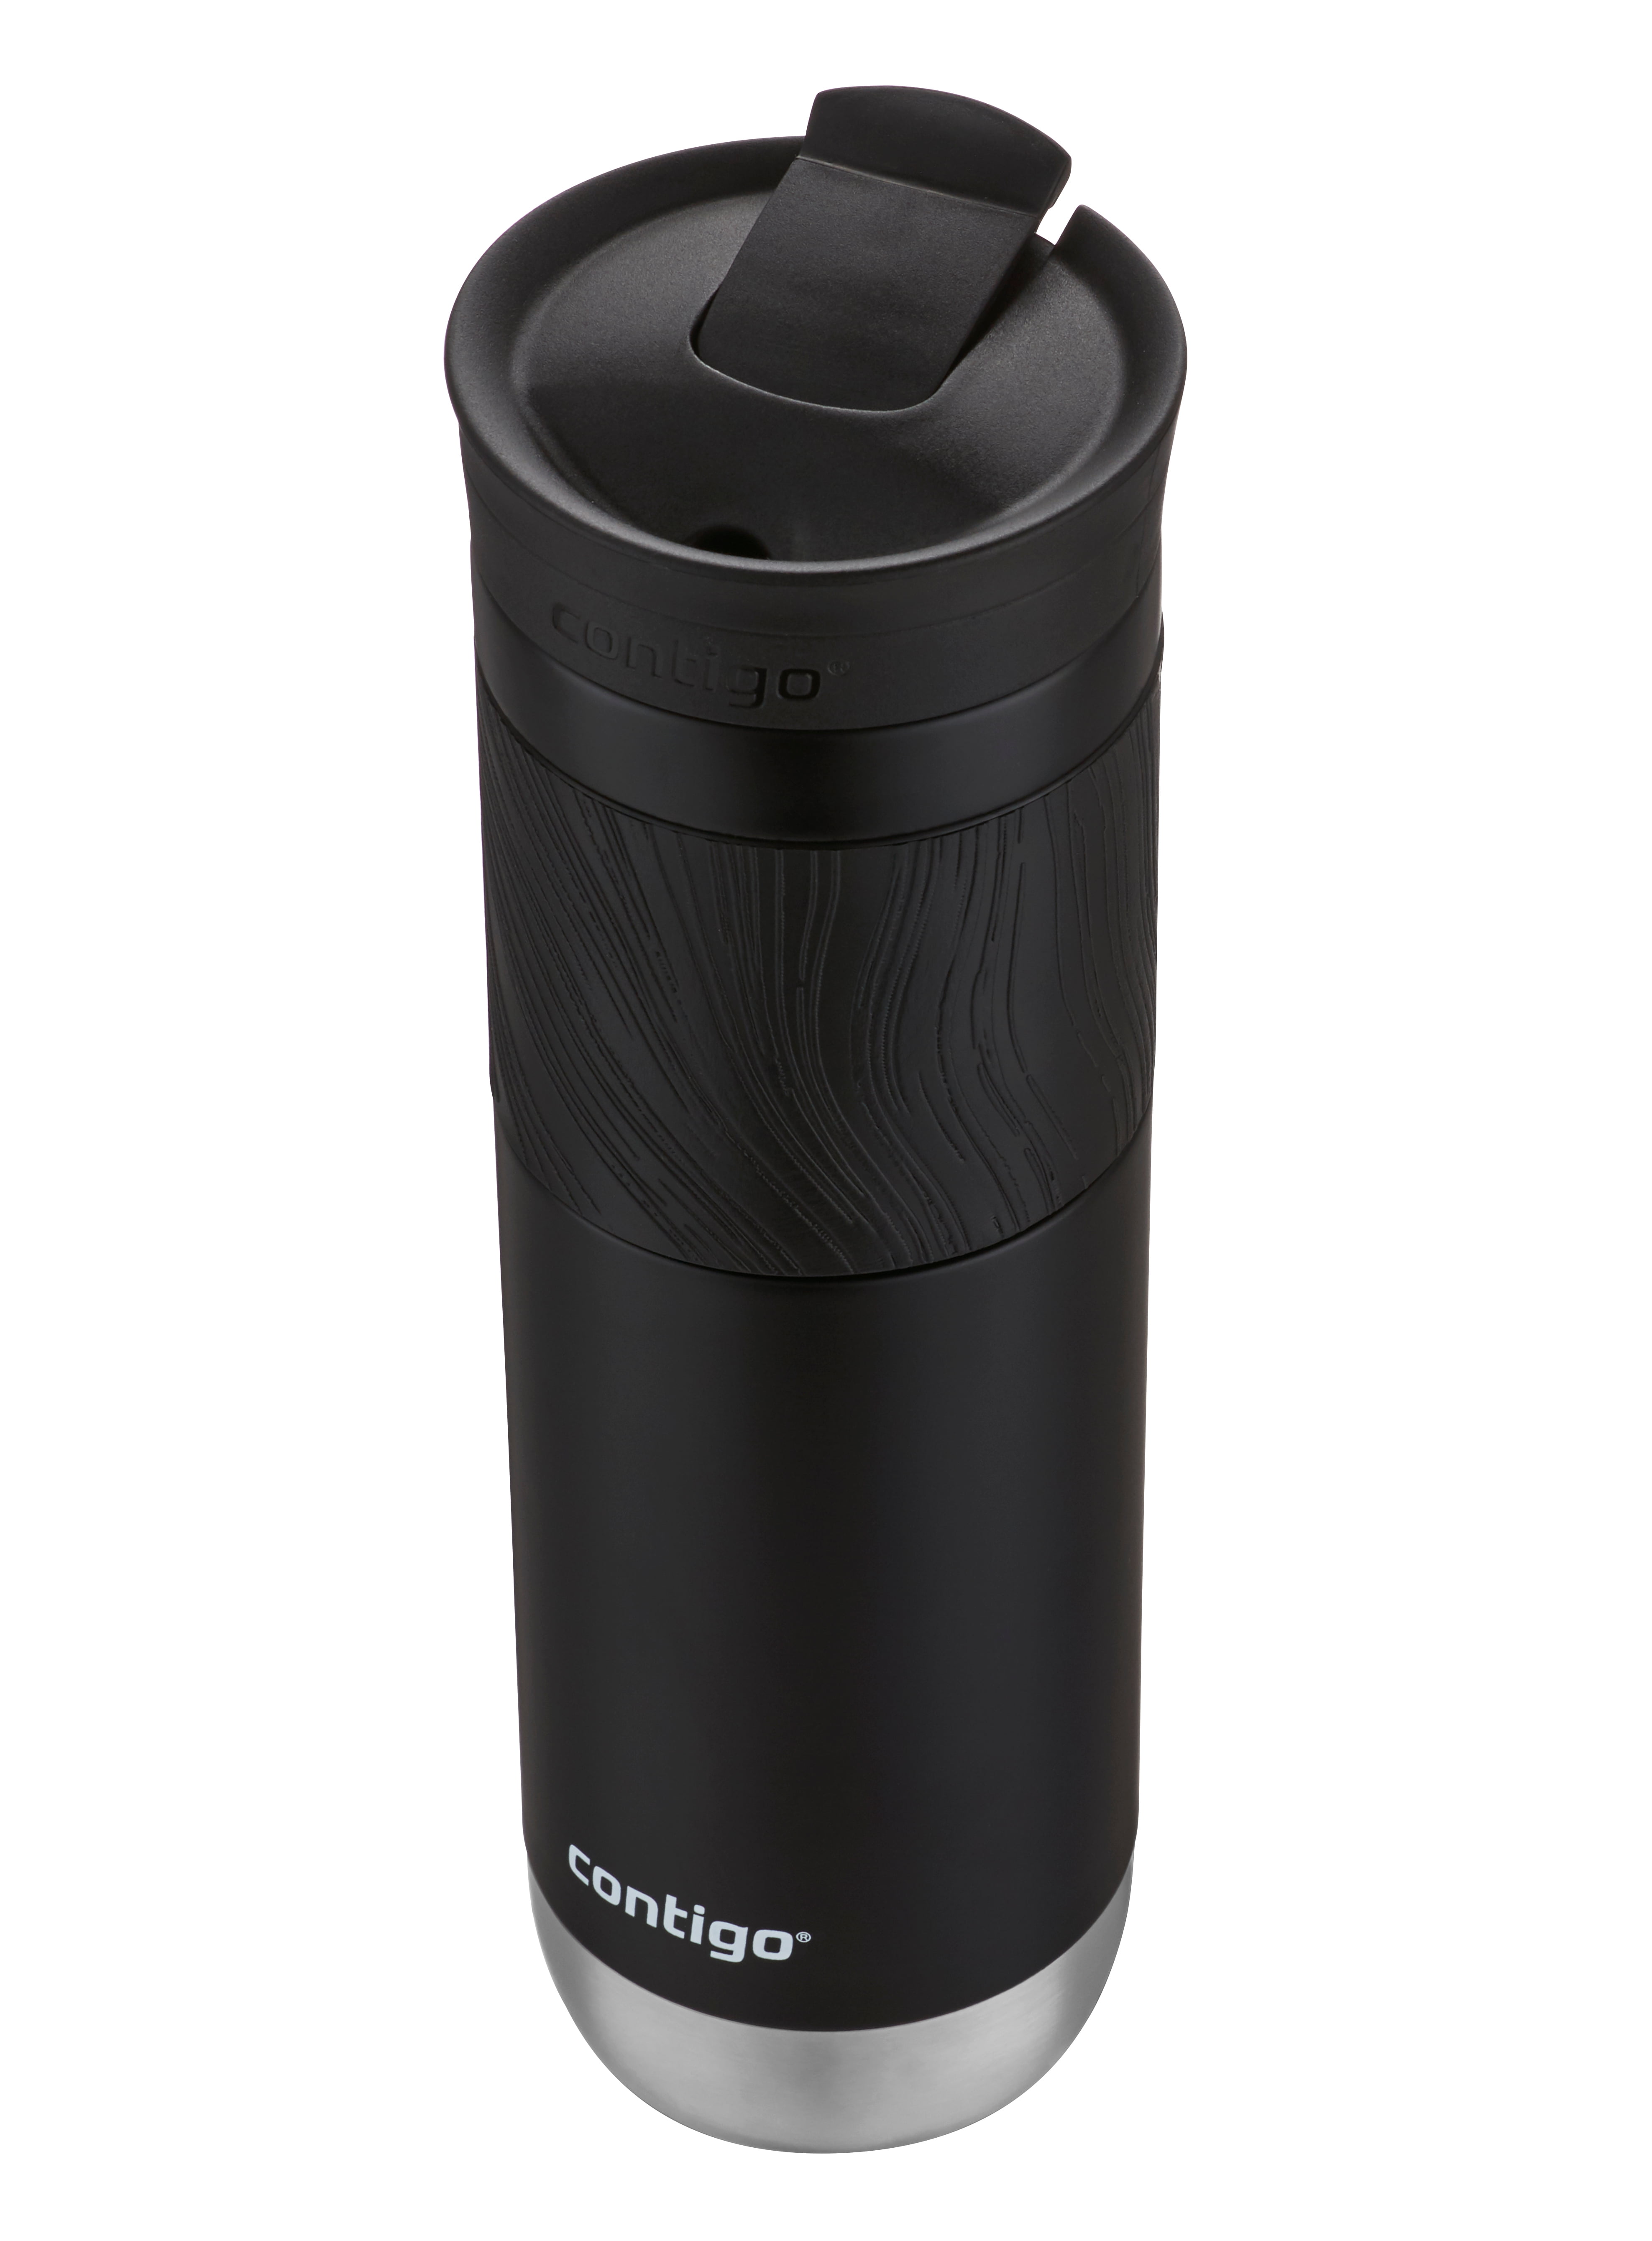  Contigo Byron Vacuum-Insulated Stainless Steel Travel Mug with  Leak-Proof Lid, Reusable Coffee Cup or Water Bottle, BPA-Free, Keeps Drinks  Hot or Cold for Hours, 16oz 2-Pack, Sake & Juniper : Home